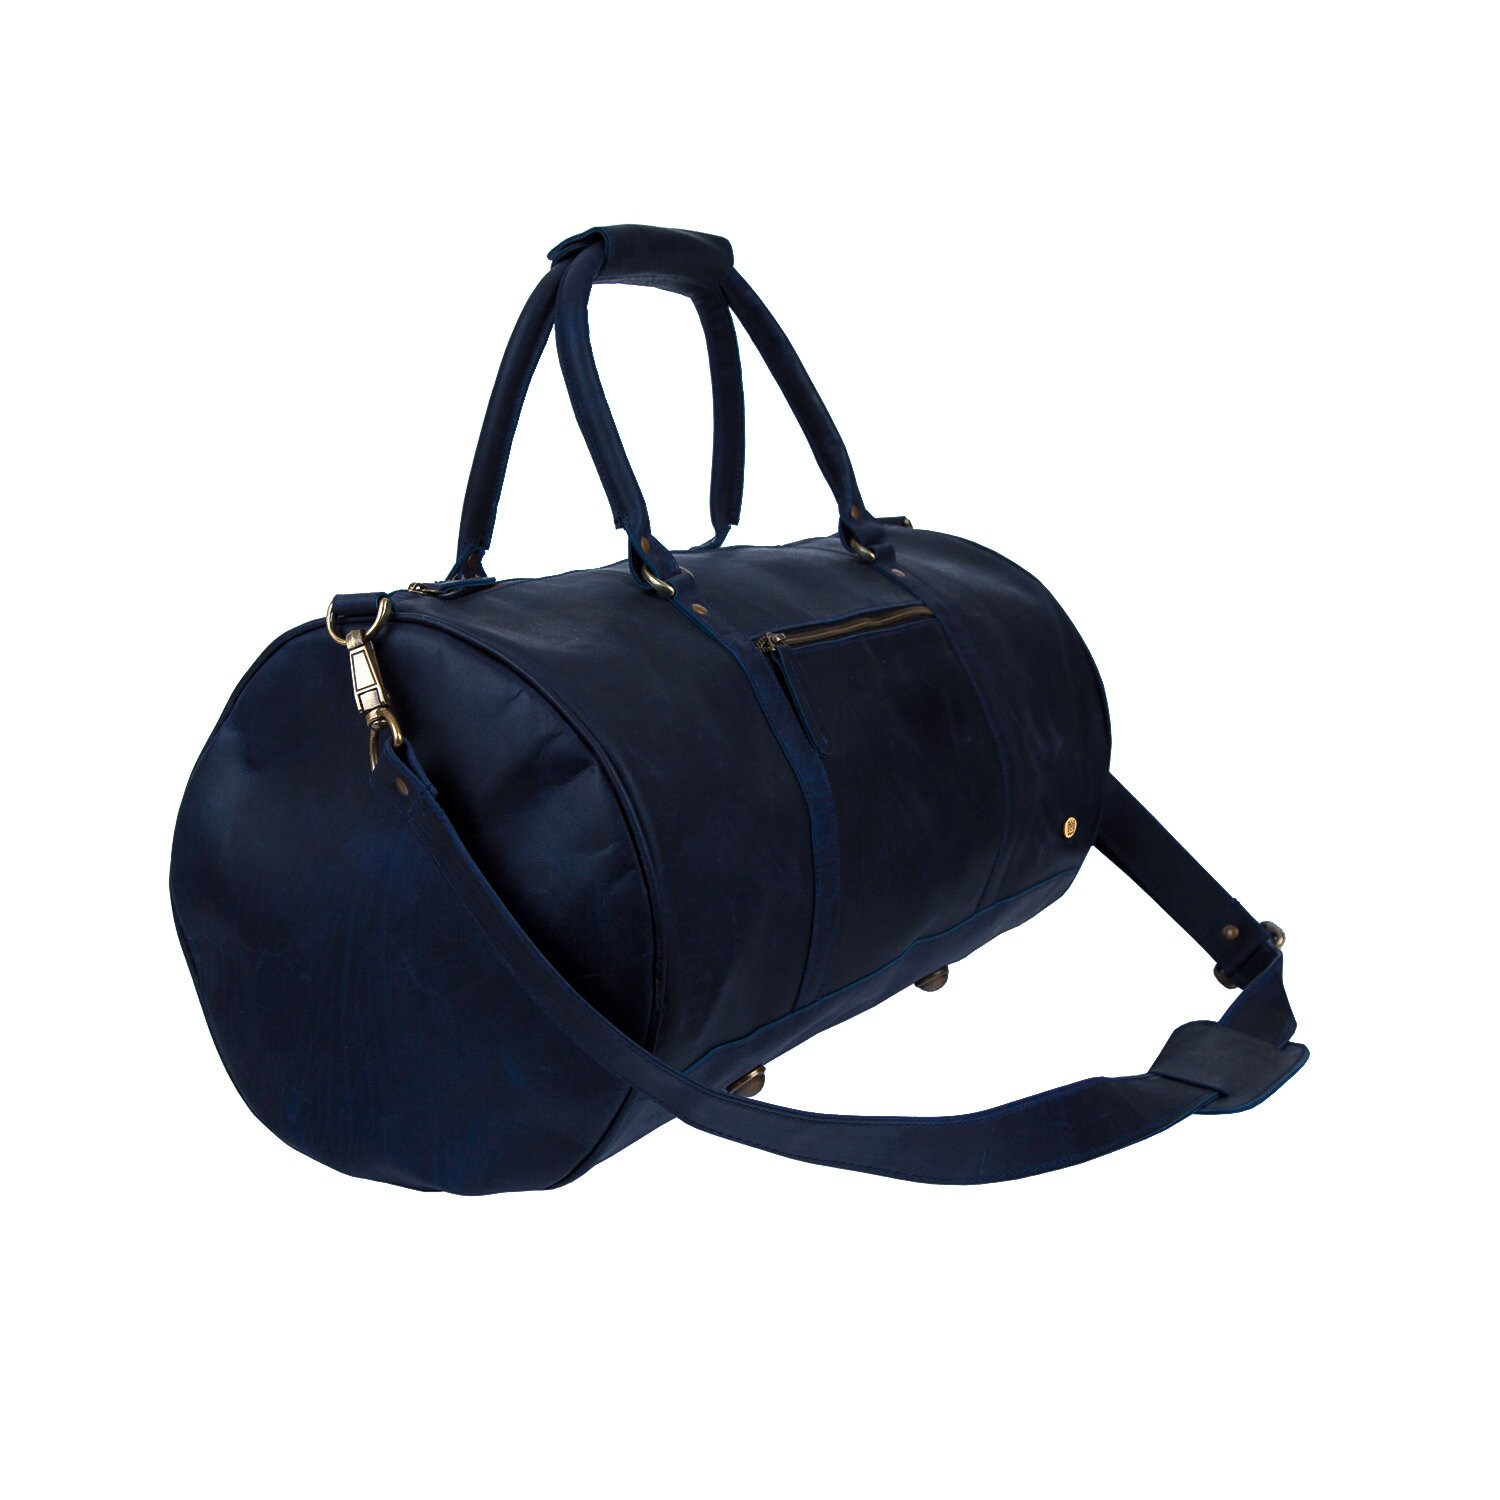 Personalized Monogram Navy Leather Duffle Bag Leather 